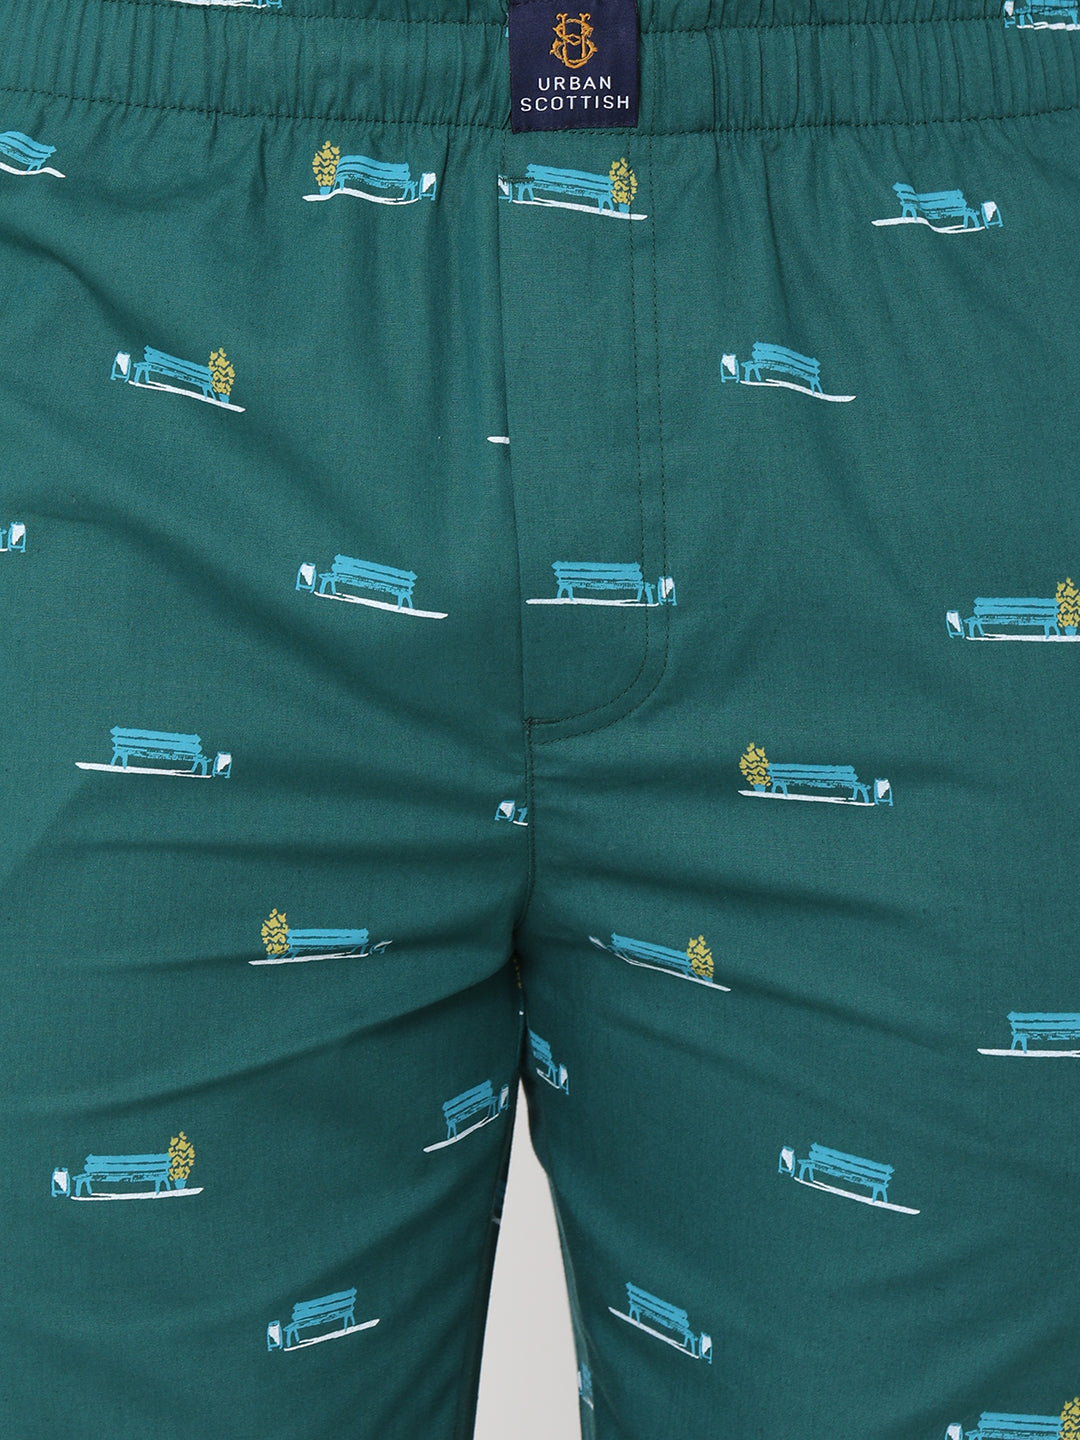 Men's Printed, Green, Cotton, Printed, Elasticated, Waistband, Pyjama  With Side Pockets